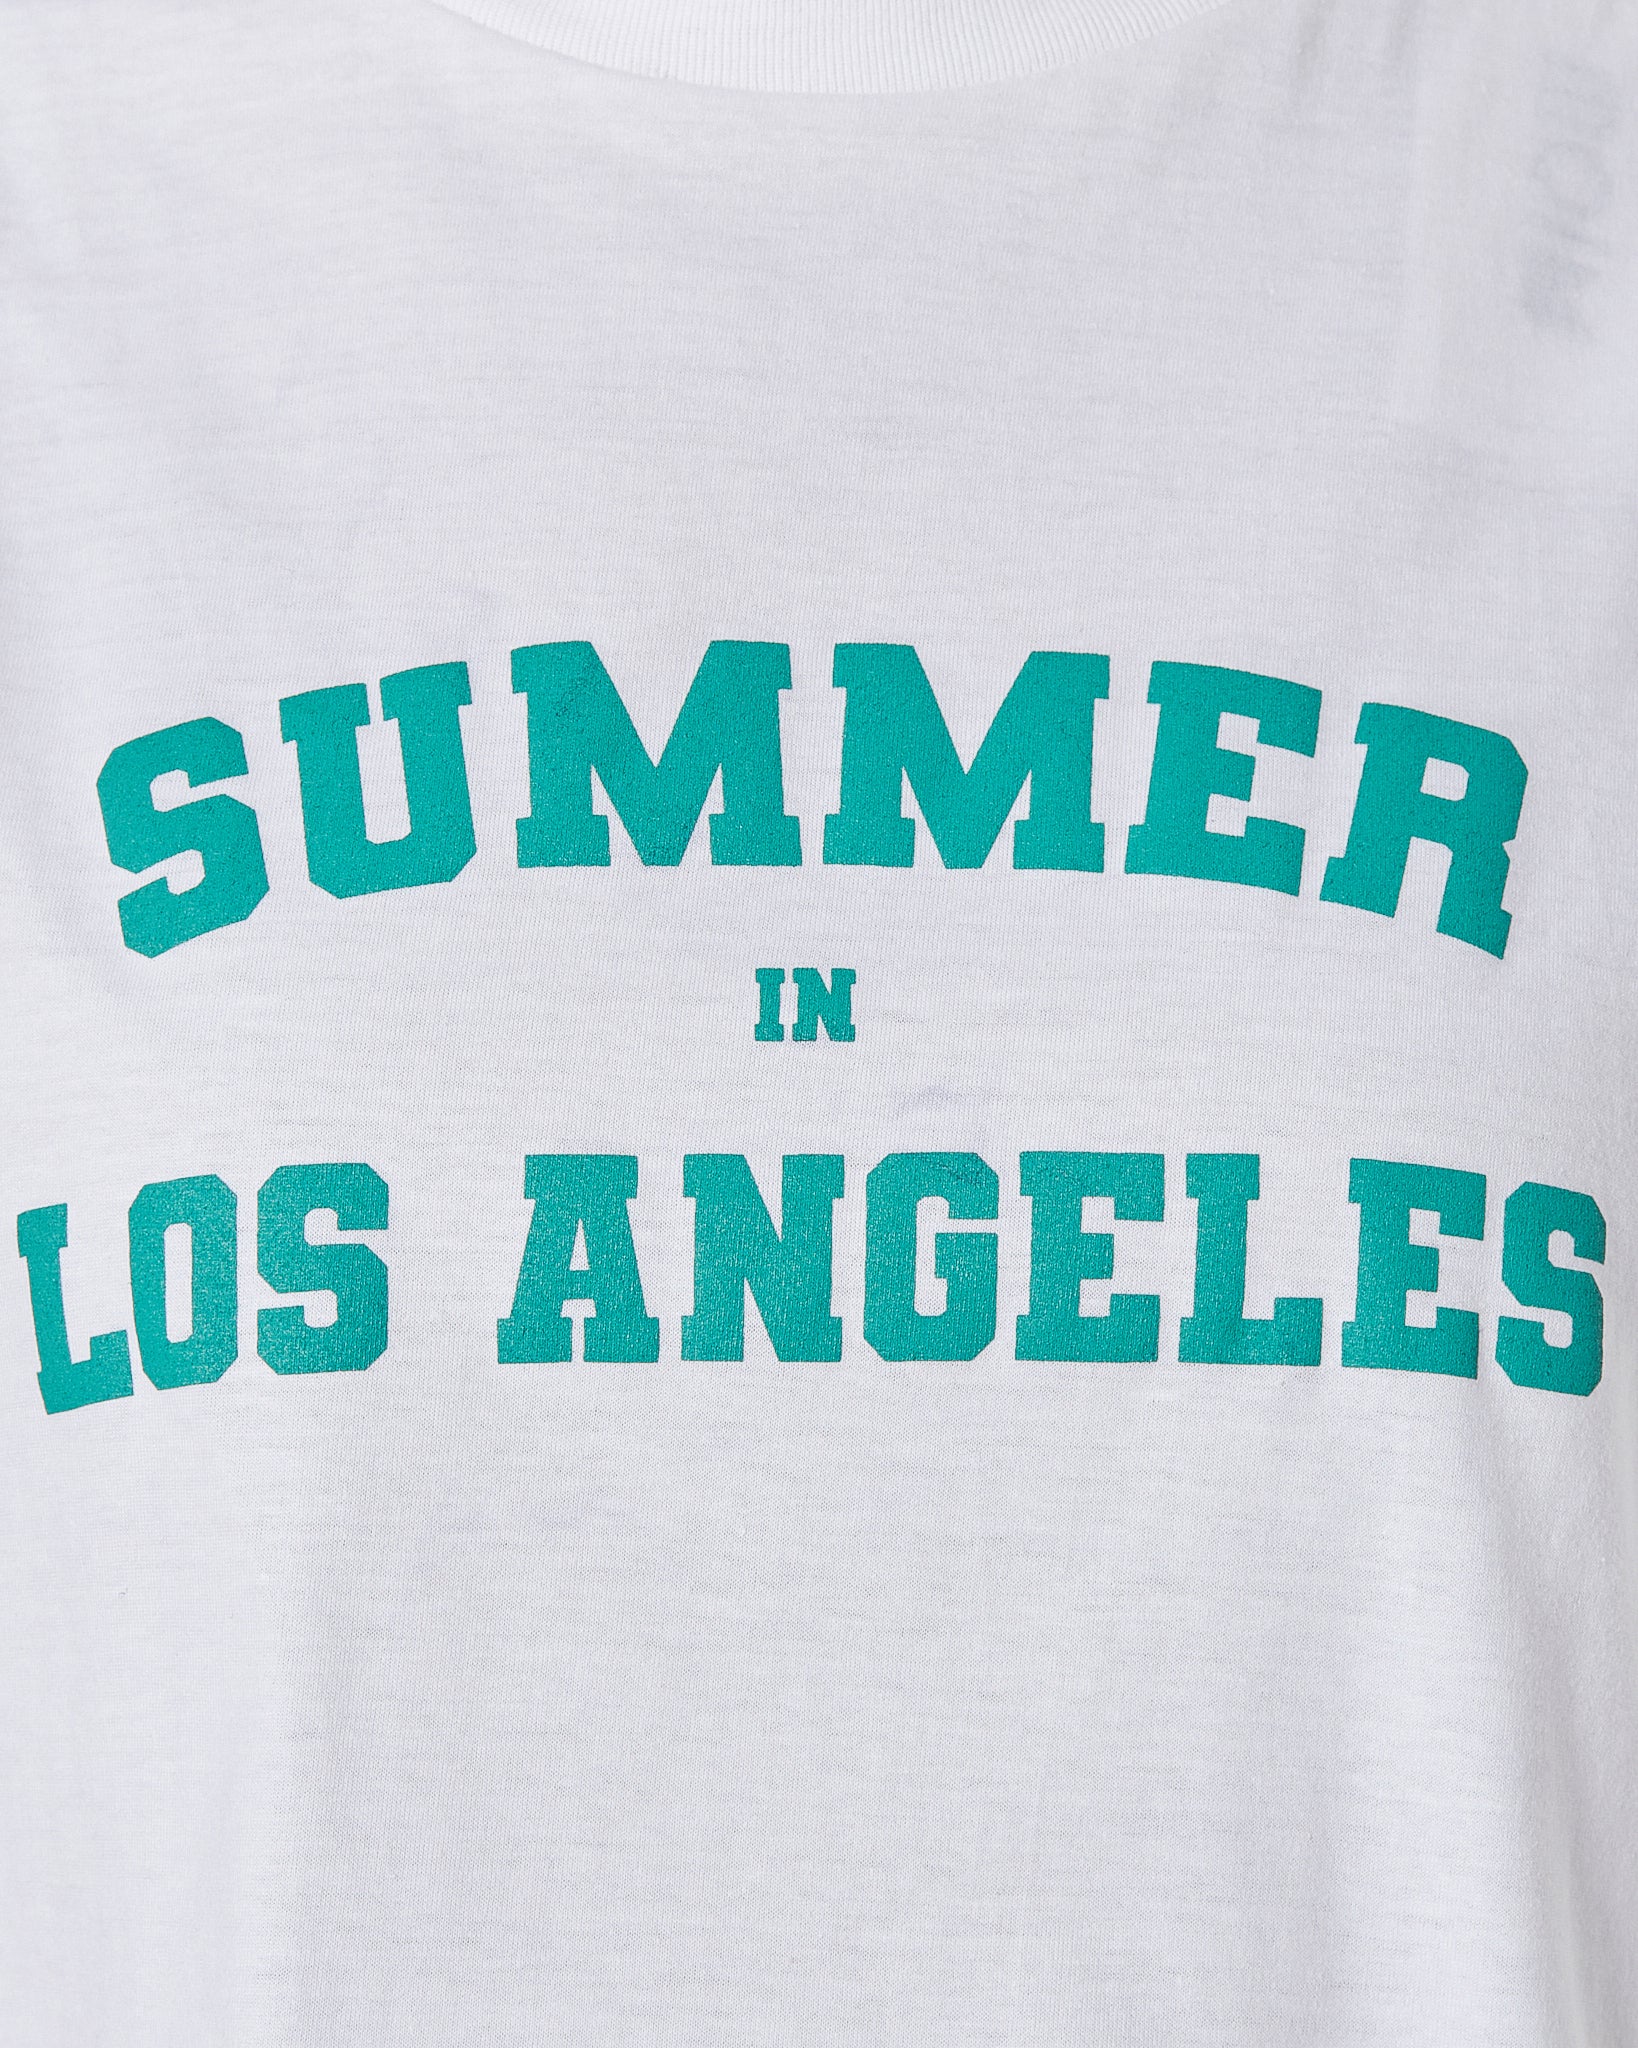 Summer In Los Angeles Lady White T-Shirt Crop Top 9.90